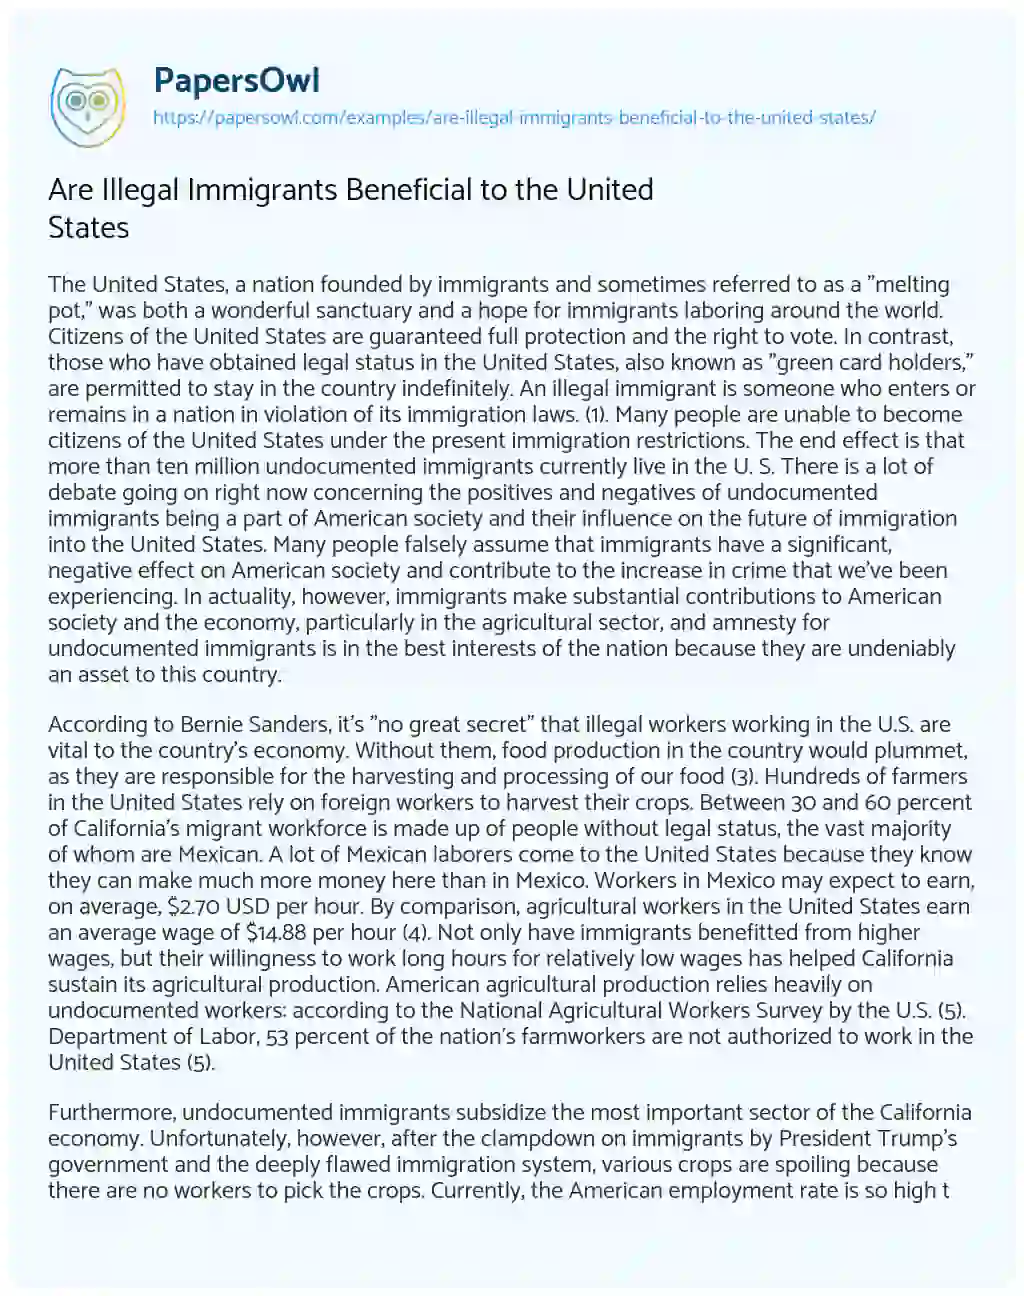 Essay on Are Illegal Immigrants Beneficial to the United States